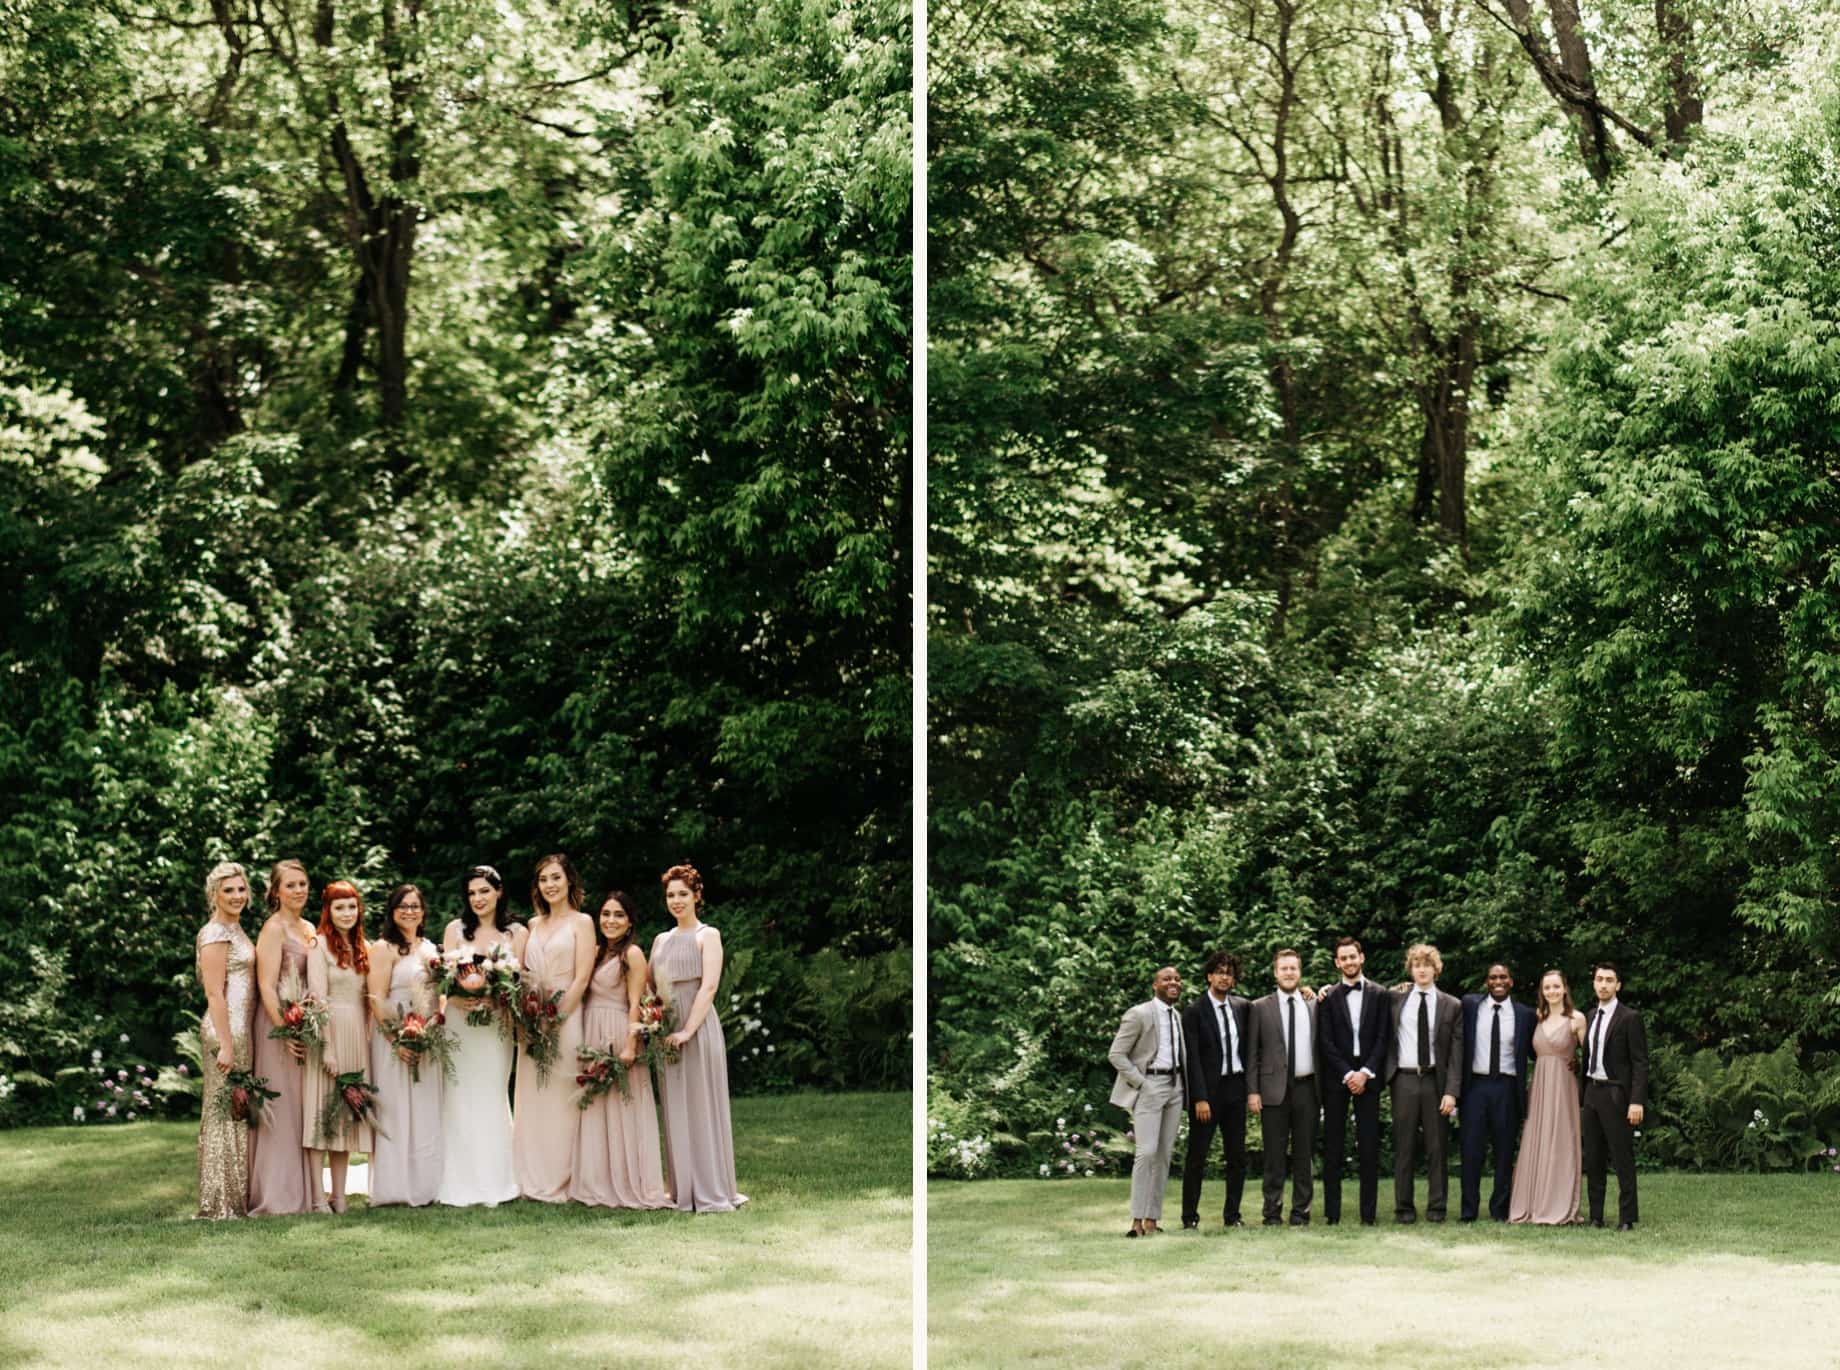 wedding party in shades of blush and gray